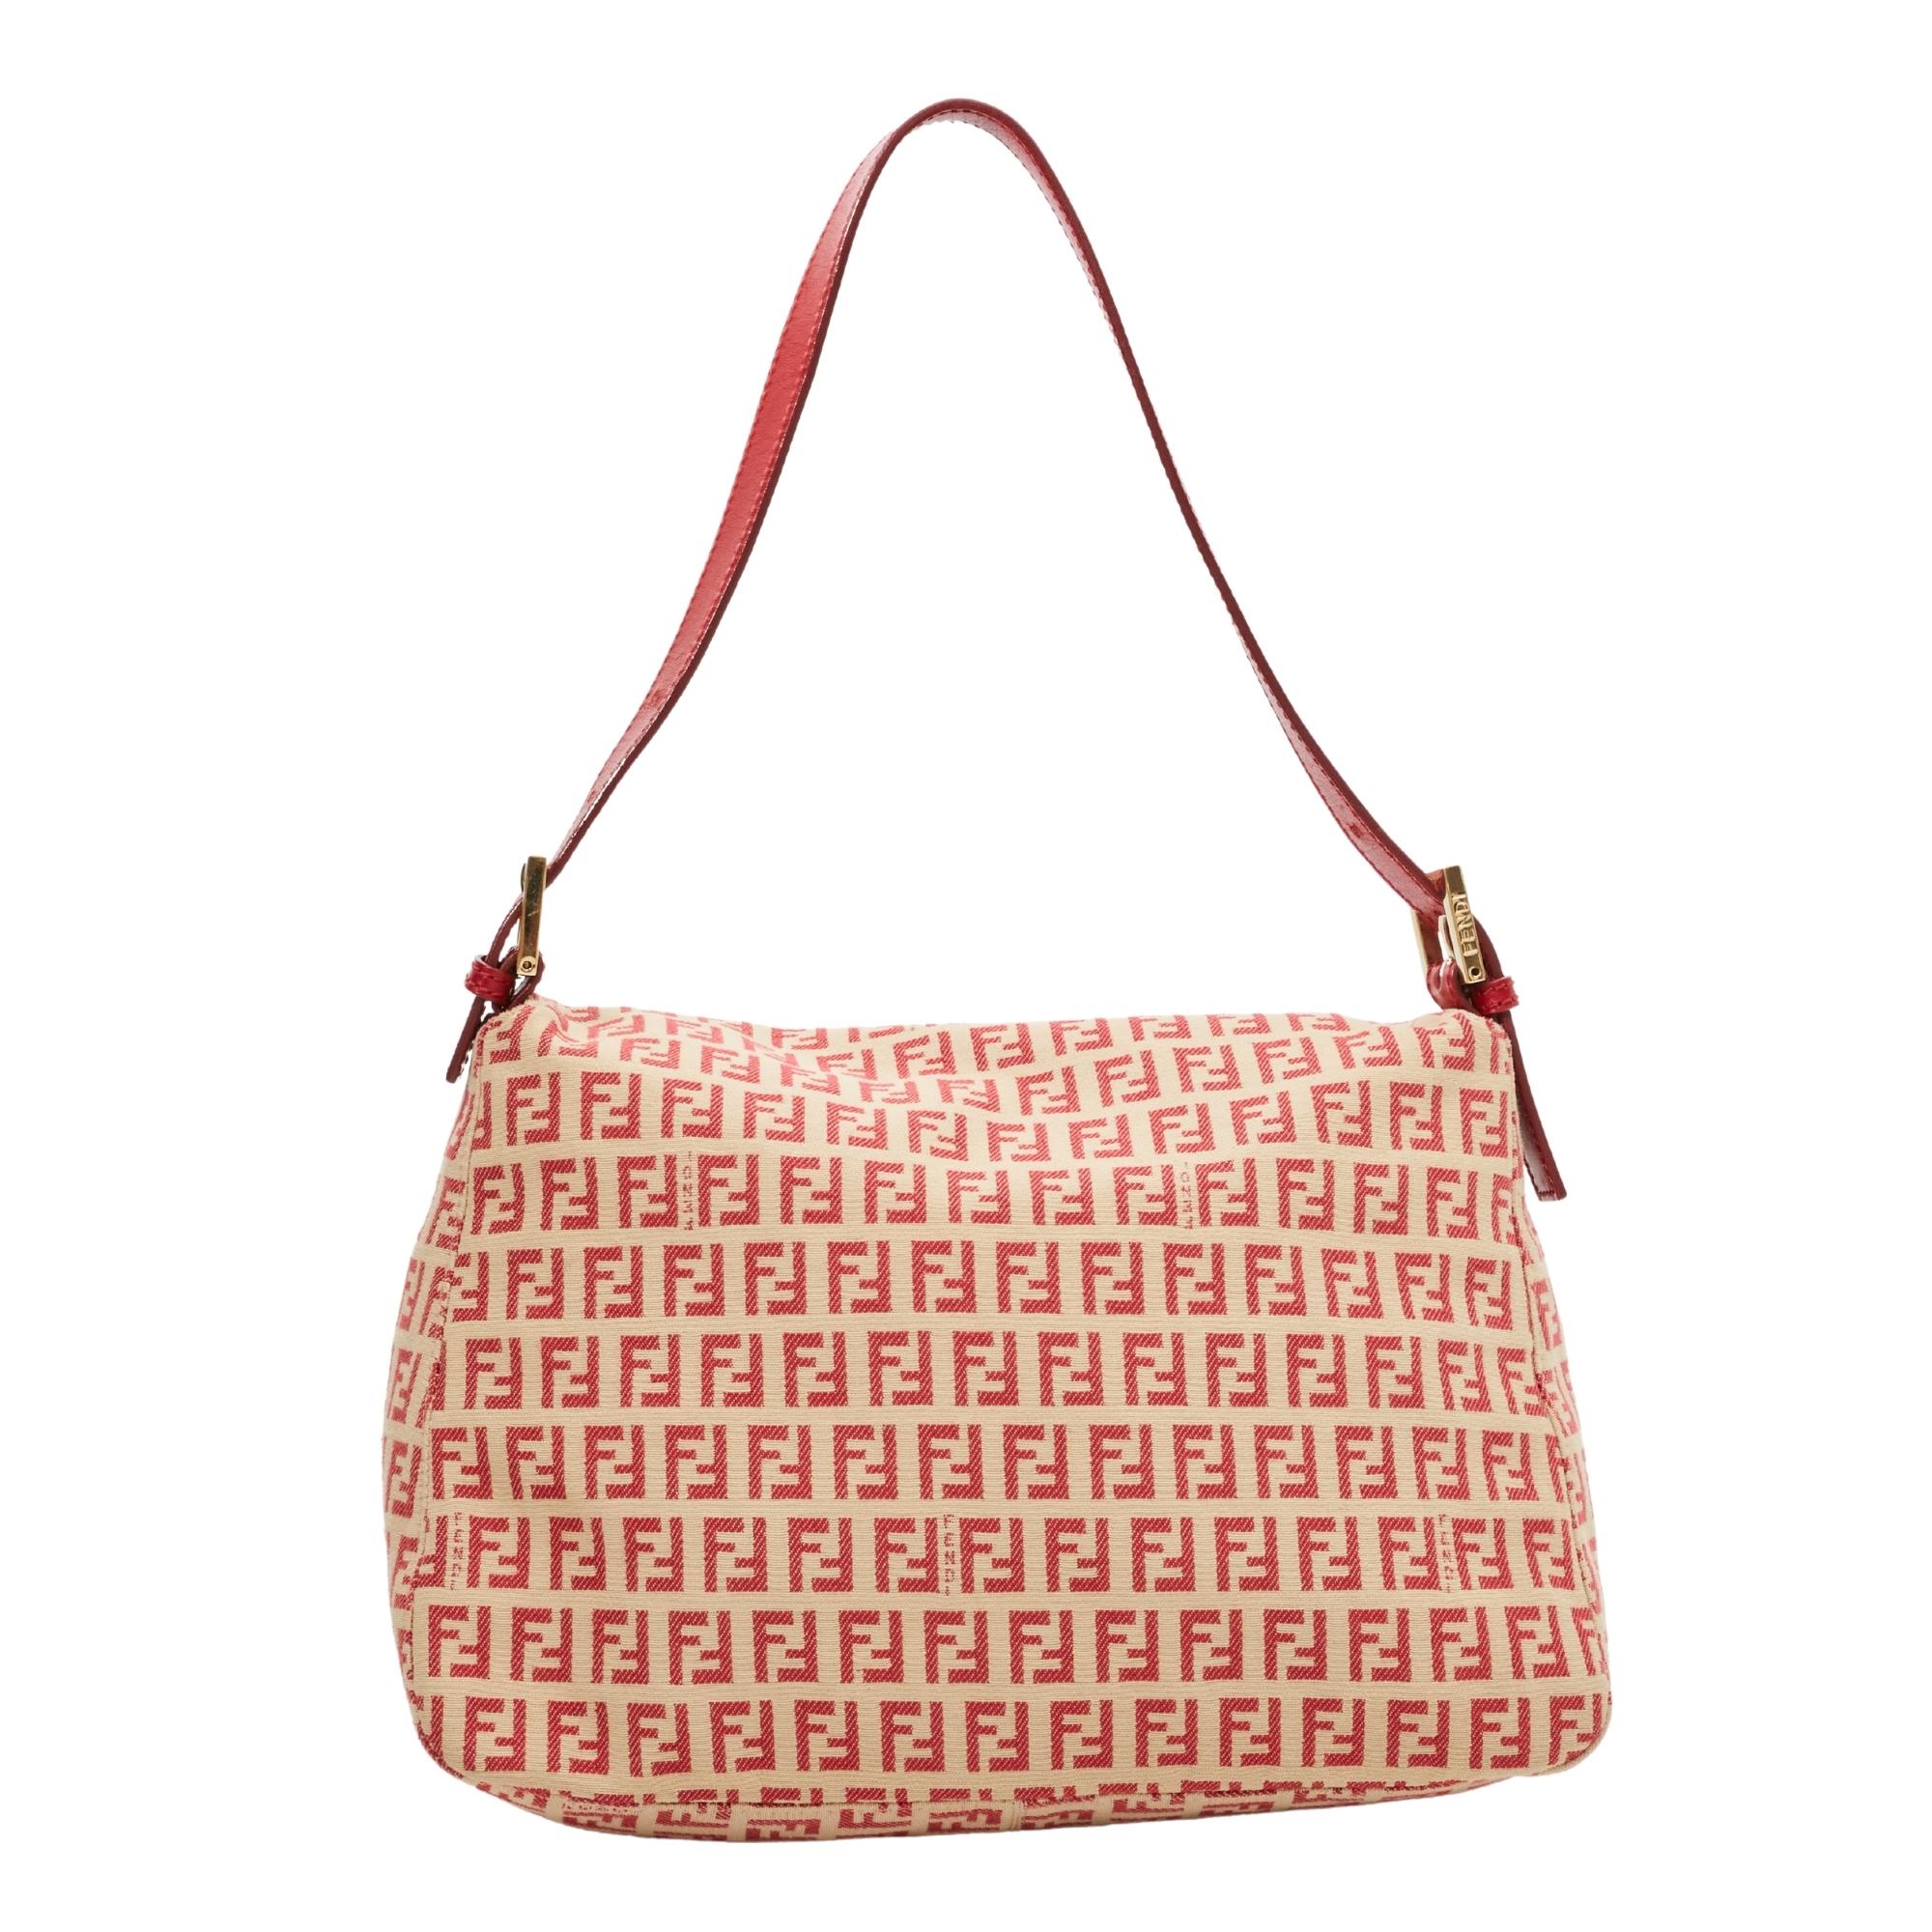 This Mama baguette is made with beige canvas with red Fendi Zuccino embossing throughout. The bag features an adjustable looping leather strap, polished silver buckle links for the top strap and a front leather strap with a polished silver FF logo.